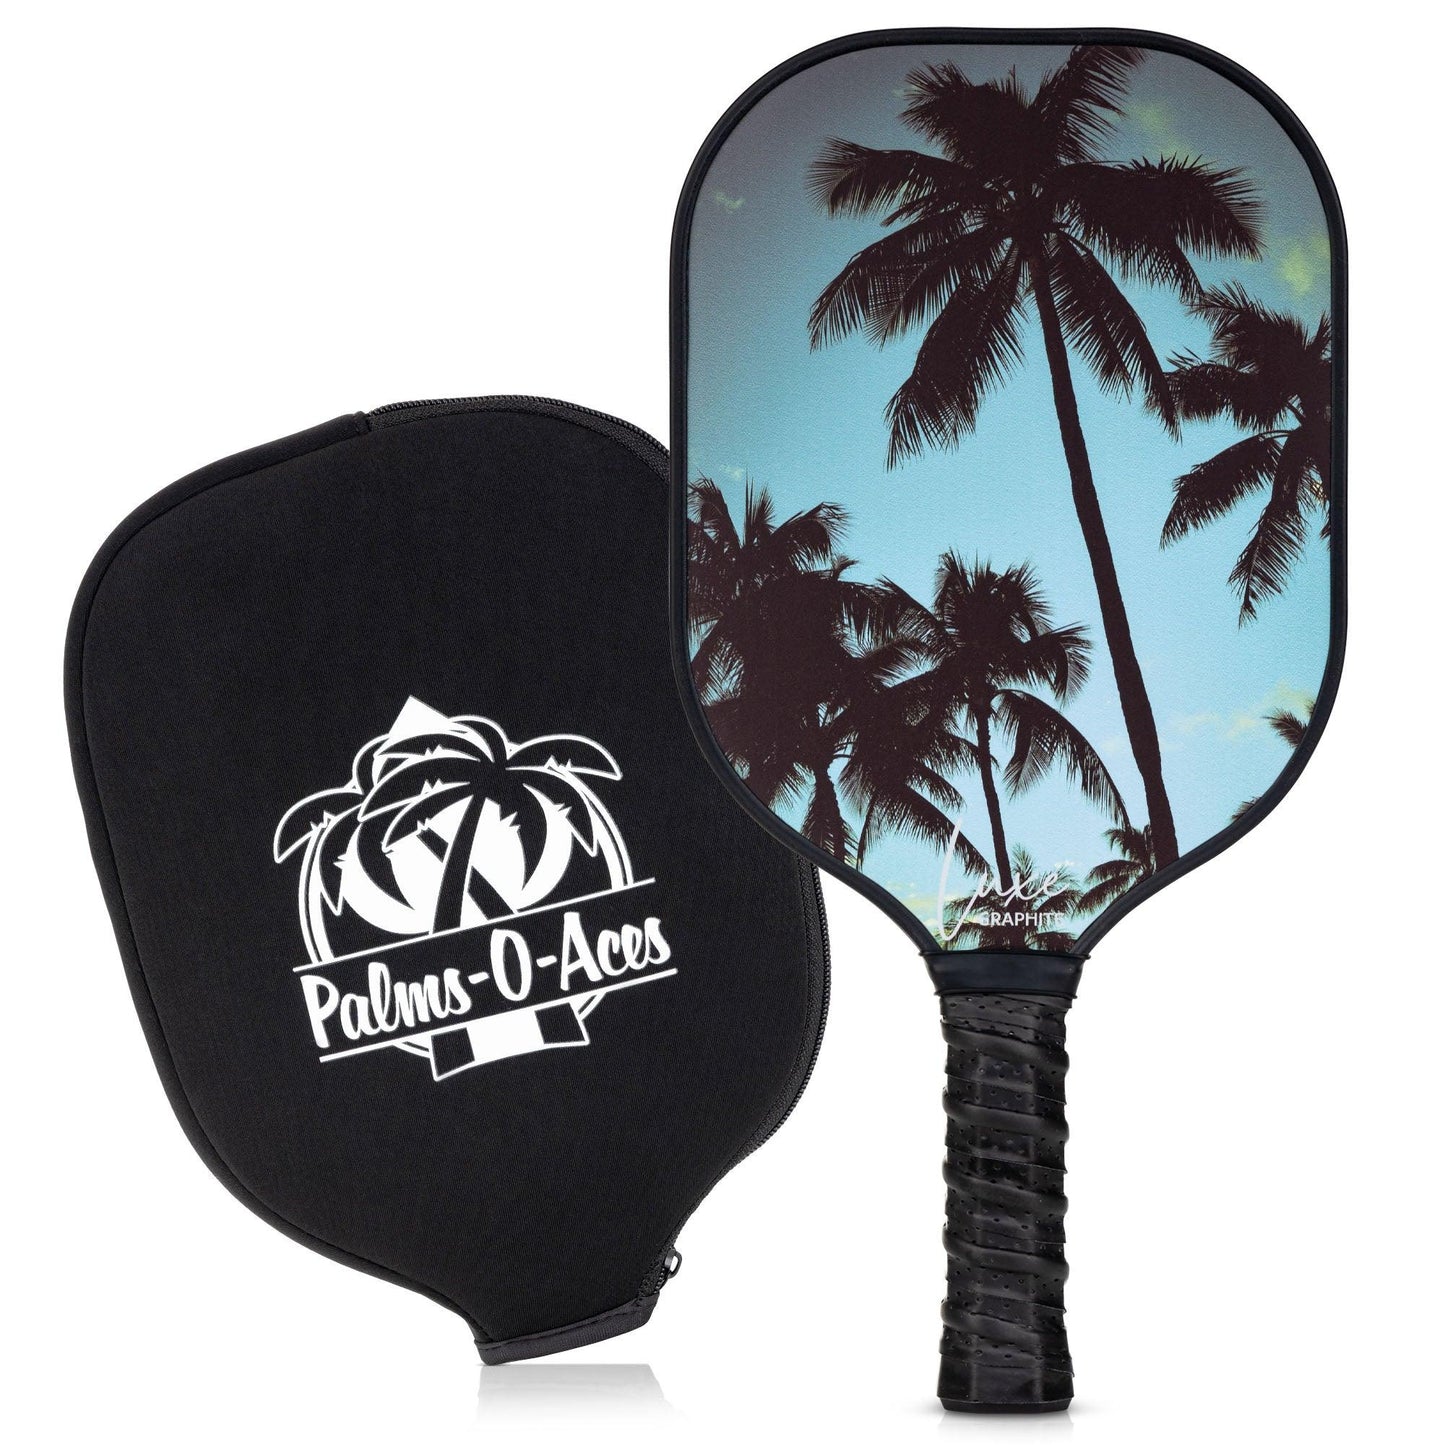 The Palms Luxe Graphite Pickleball Paddle with Cover